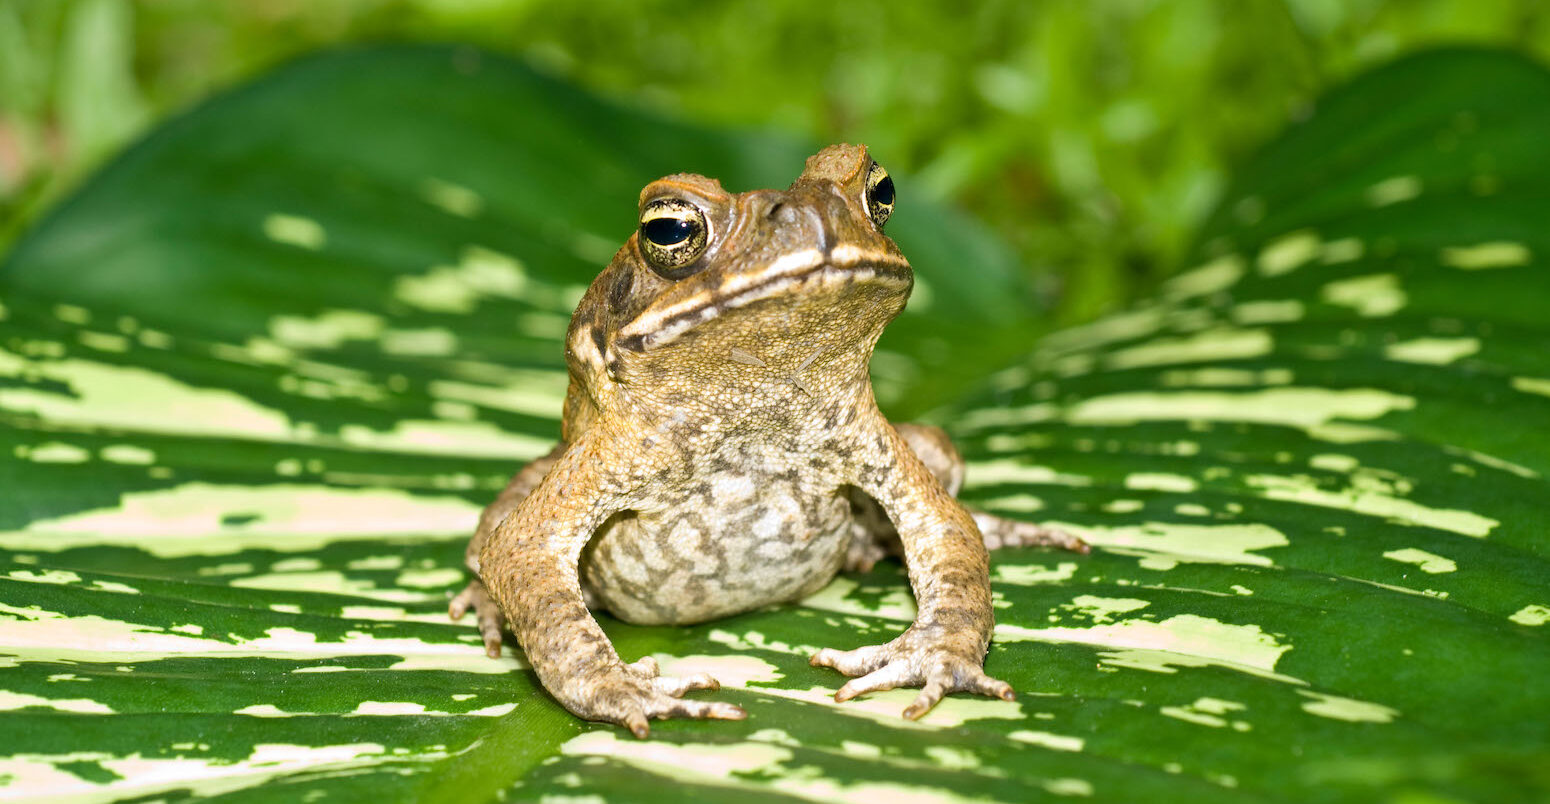 The Cane toad (Bufo marinus) in Queensland, Australia where it is an invasive species.